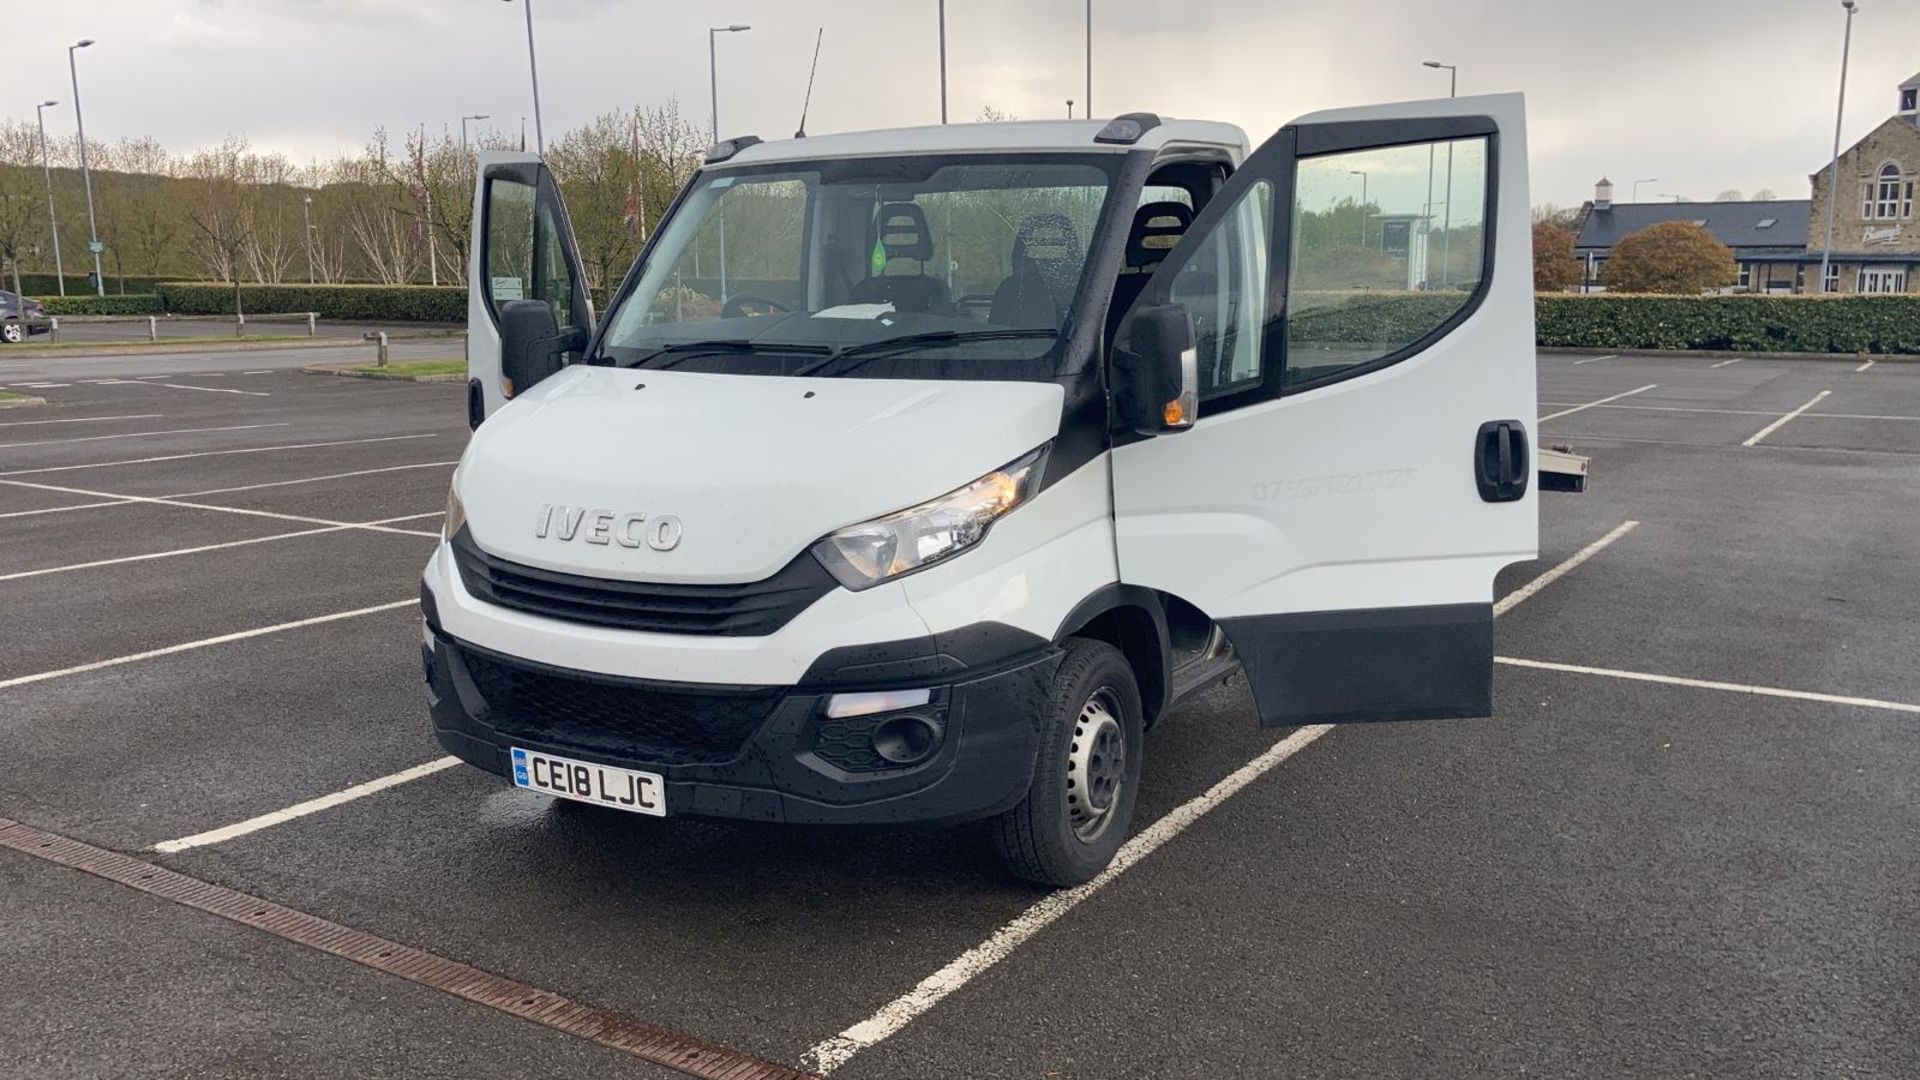 2018 (18) IVECO DAILY RECOVERY TRUCK CAR TRANSPORTER, 64,500 WARRANTED MILES, 1750KG PLAYLOAD